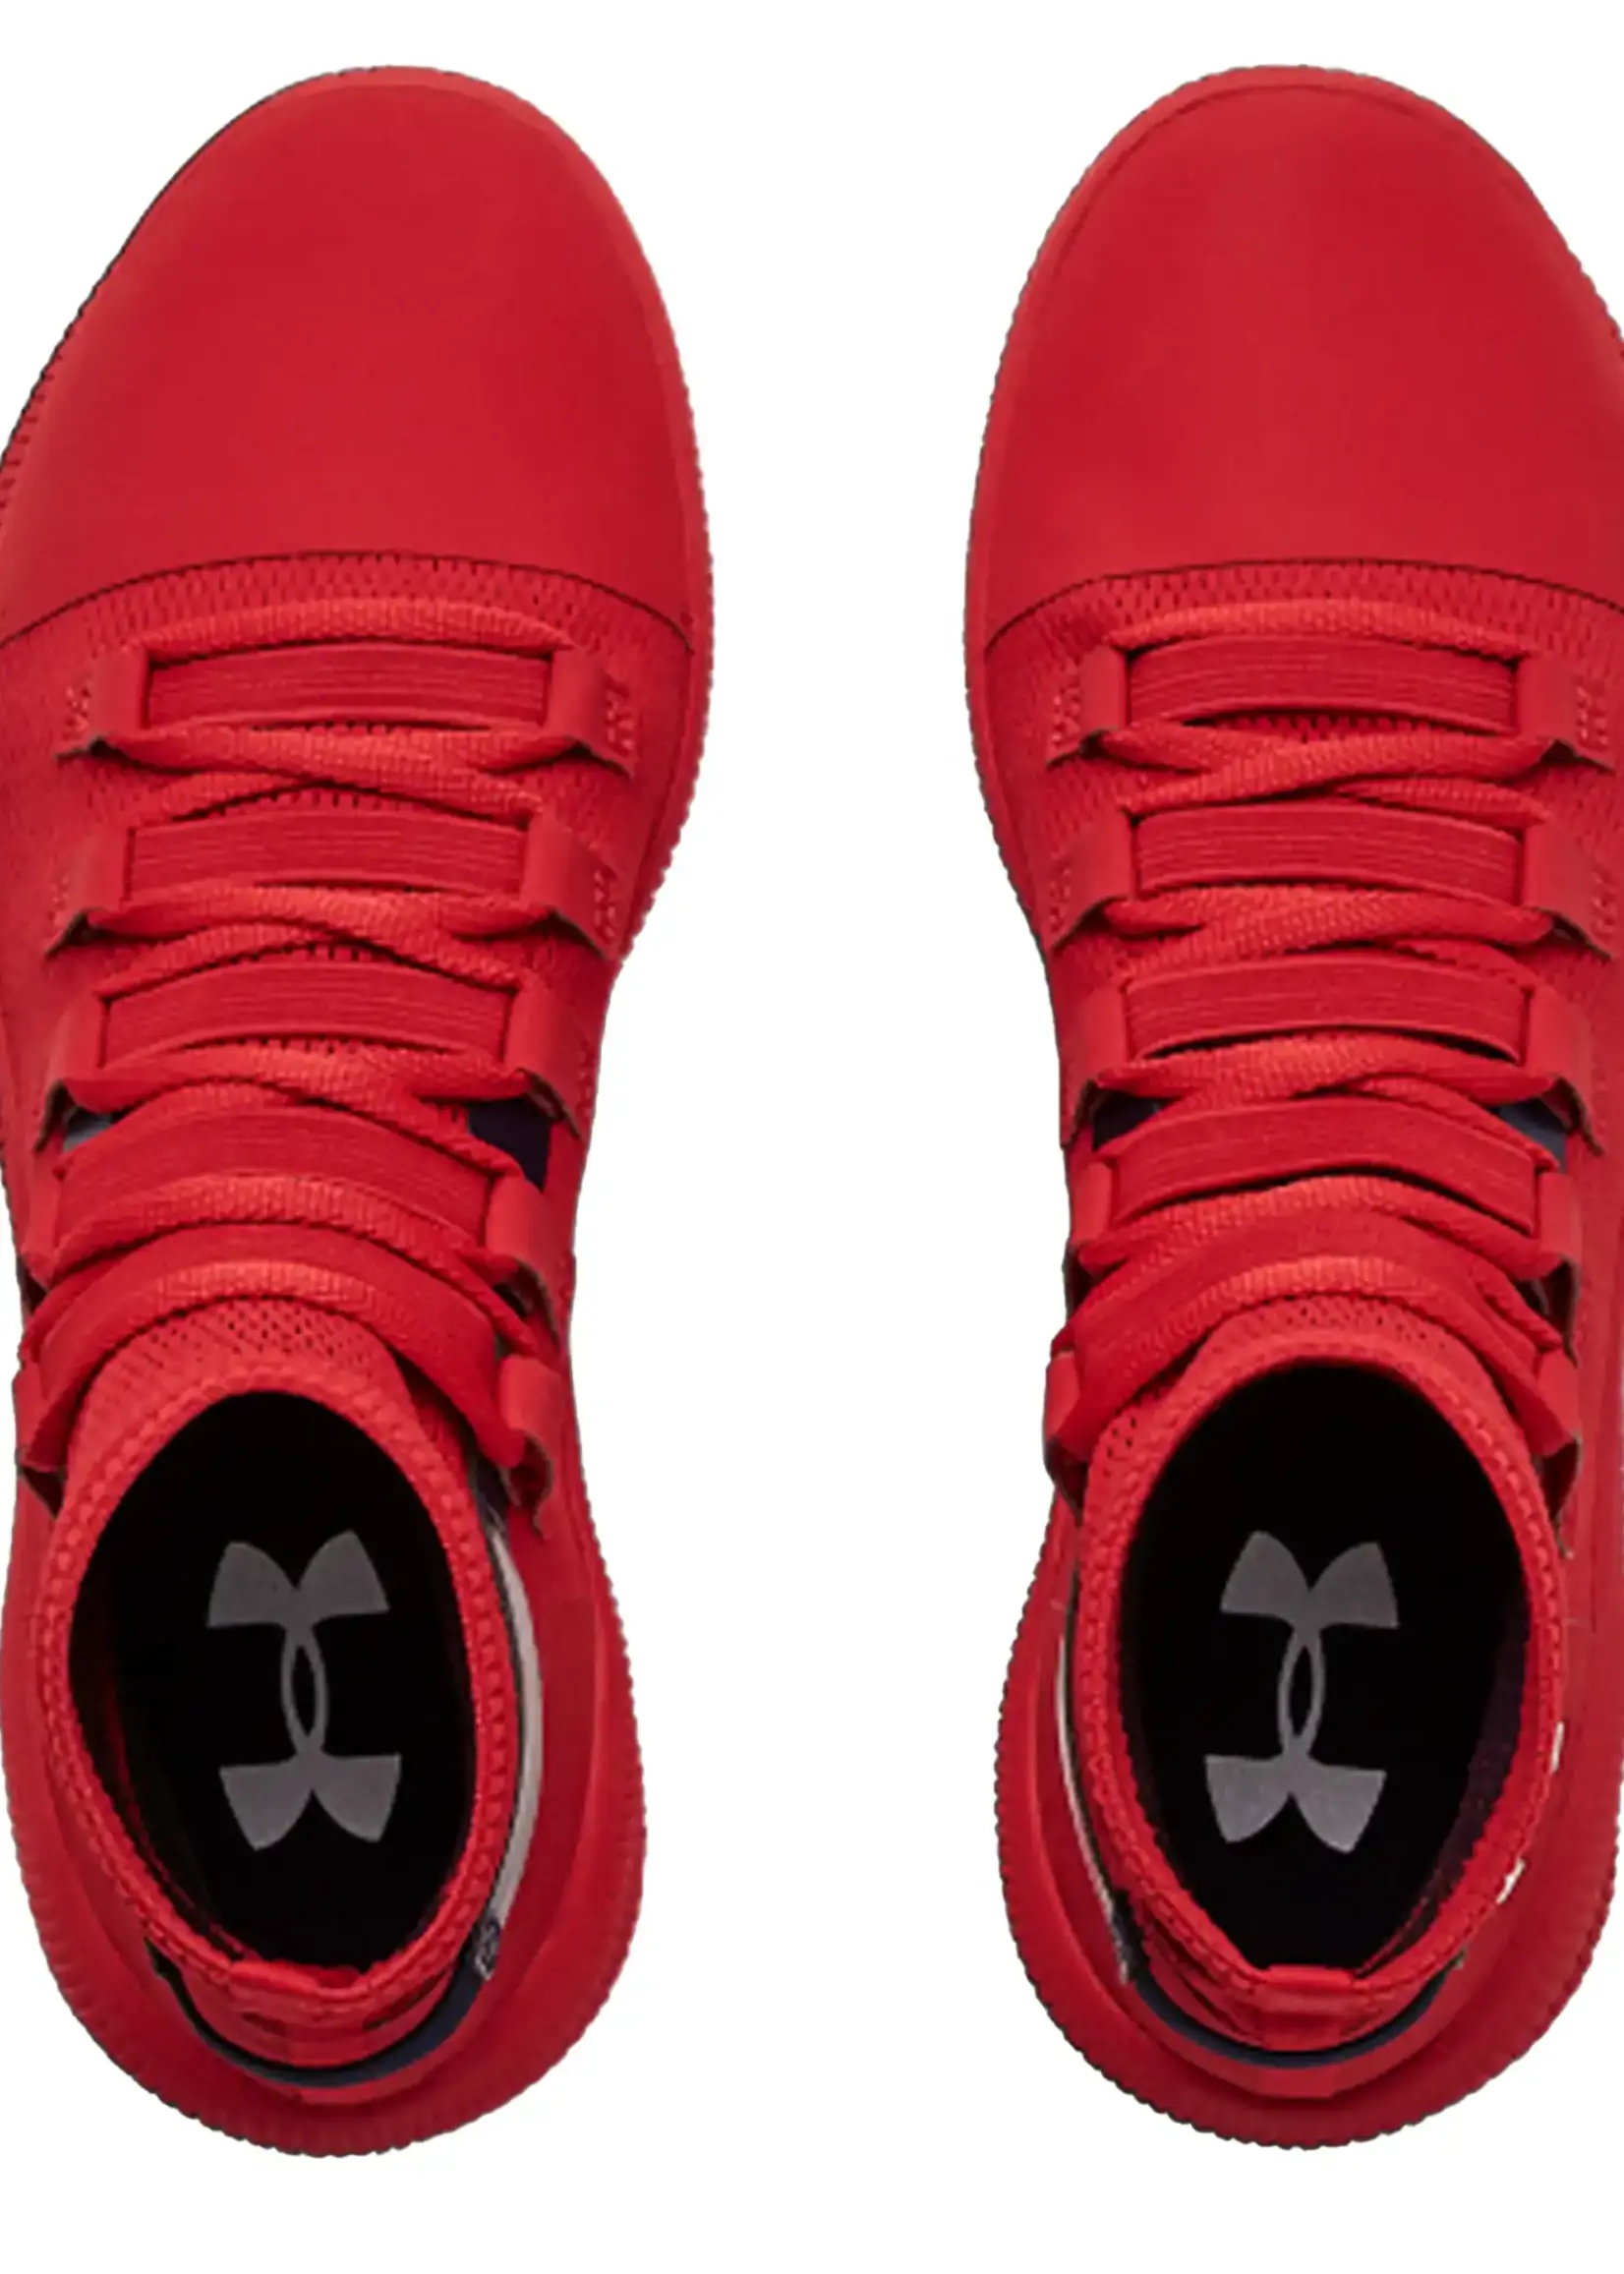 Under Armour M-Tag Red